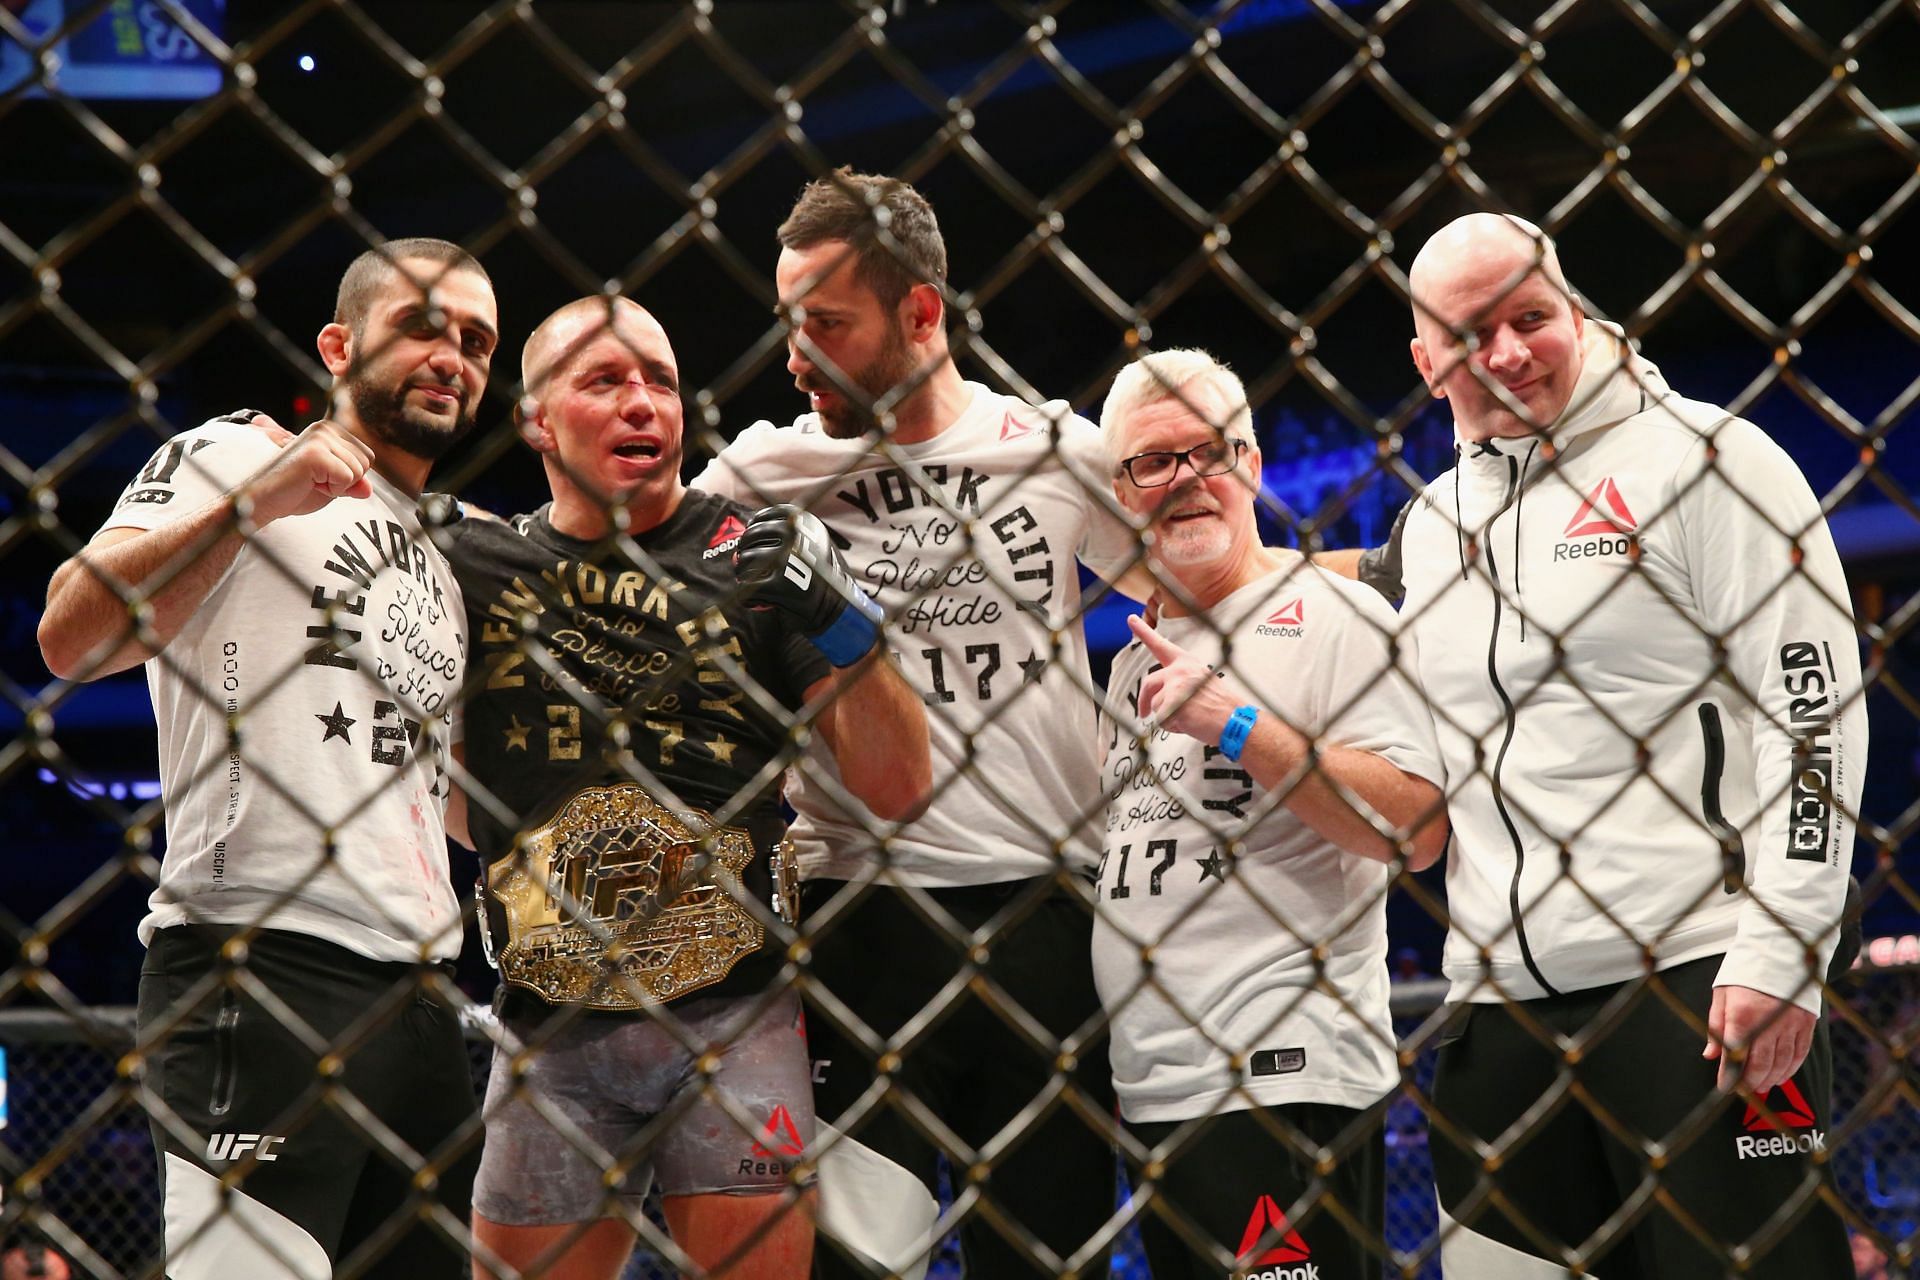 Georges St-Pierre was able to walk away from the UFC while still at the top on two occasions